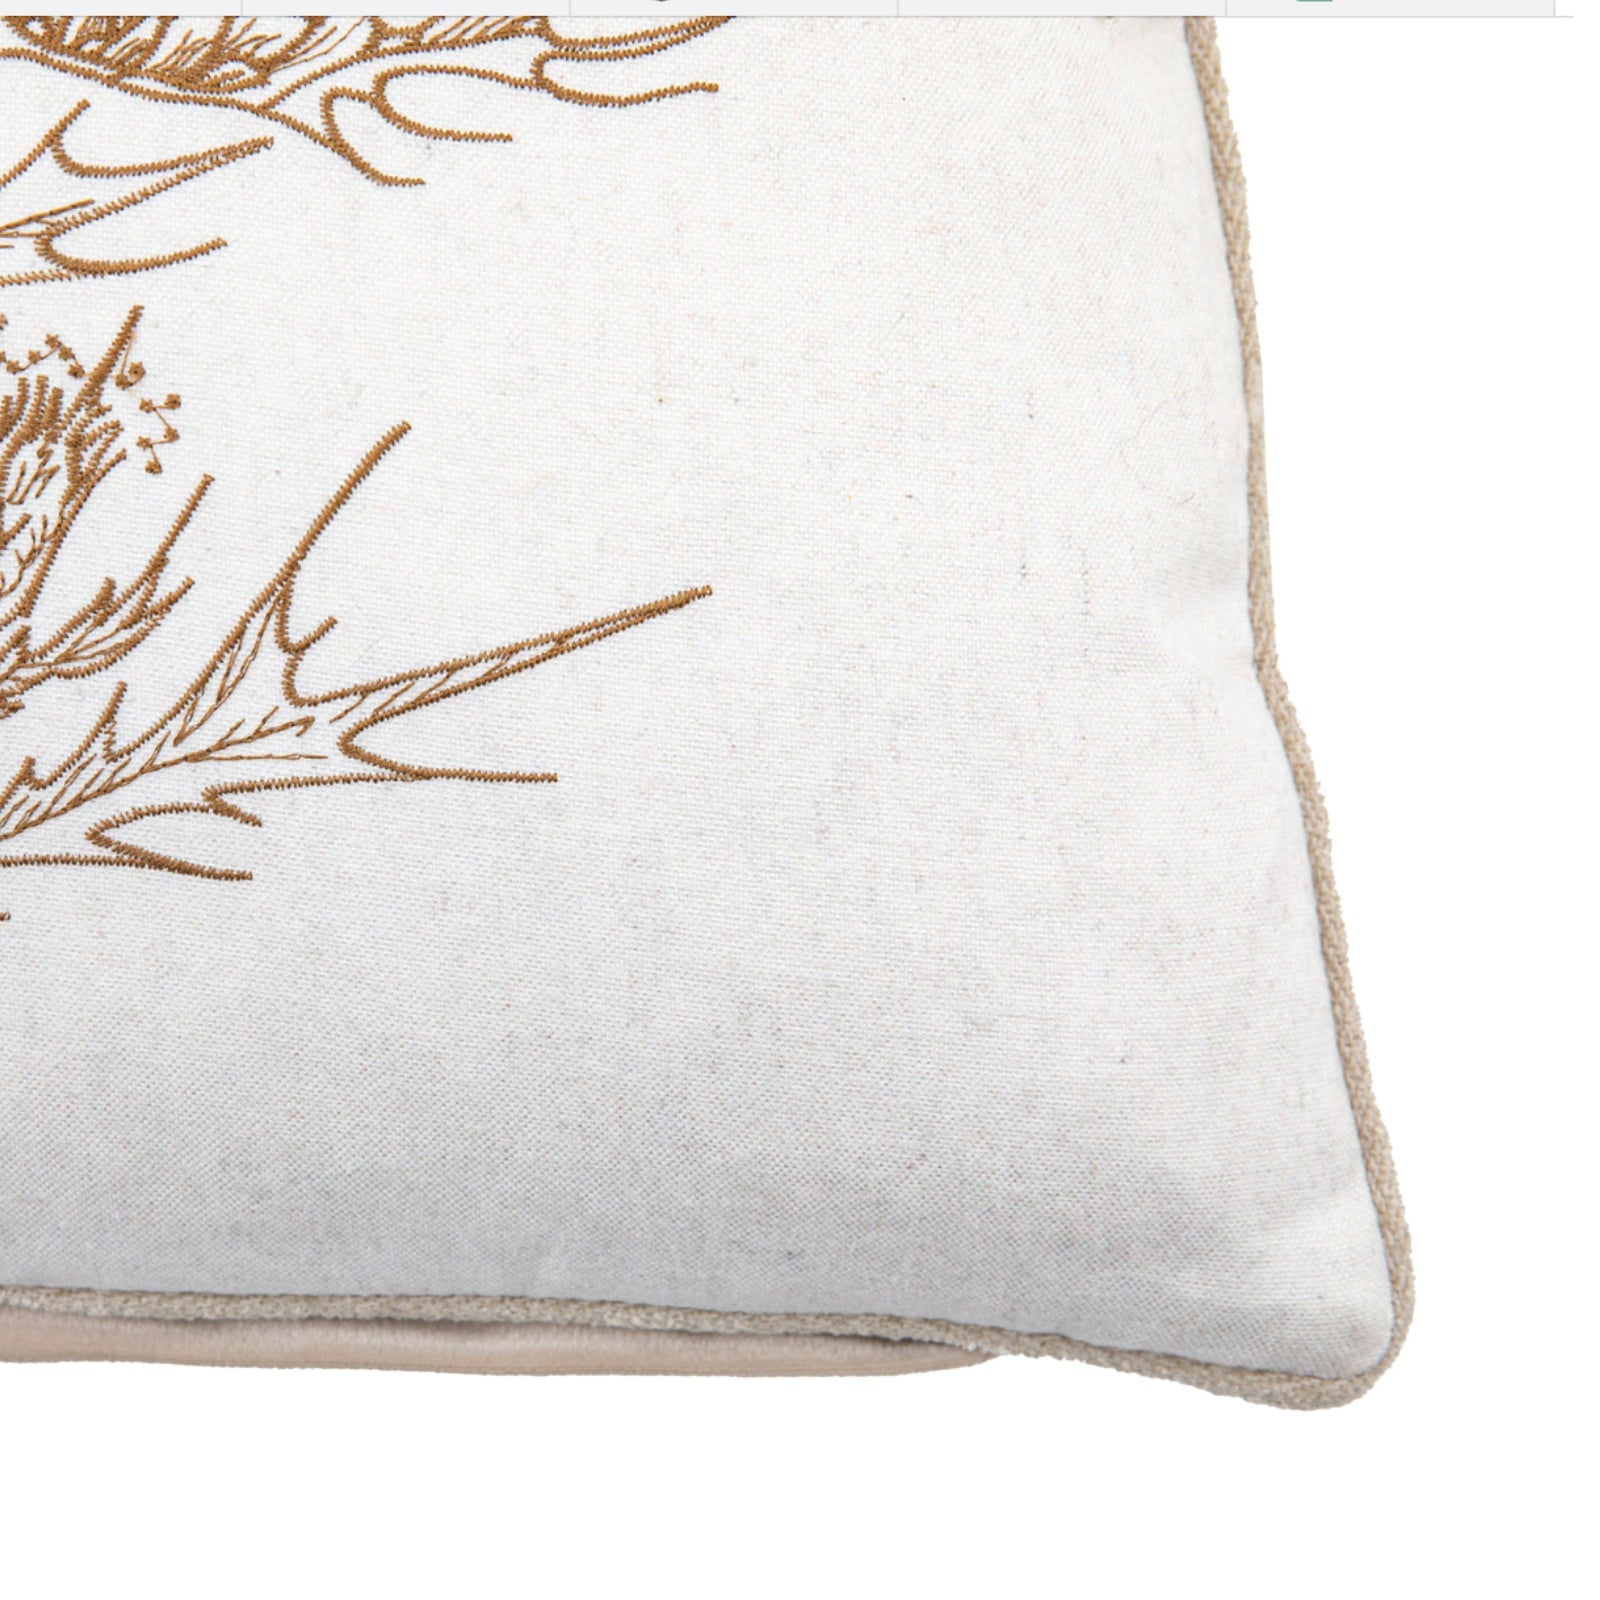 Embroidered Thistle Cushion Cover - The Farthing